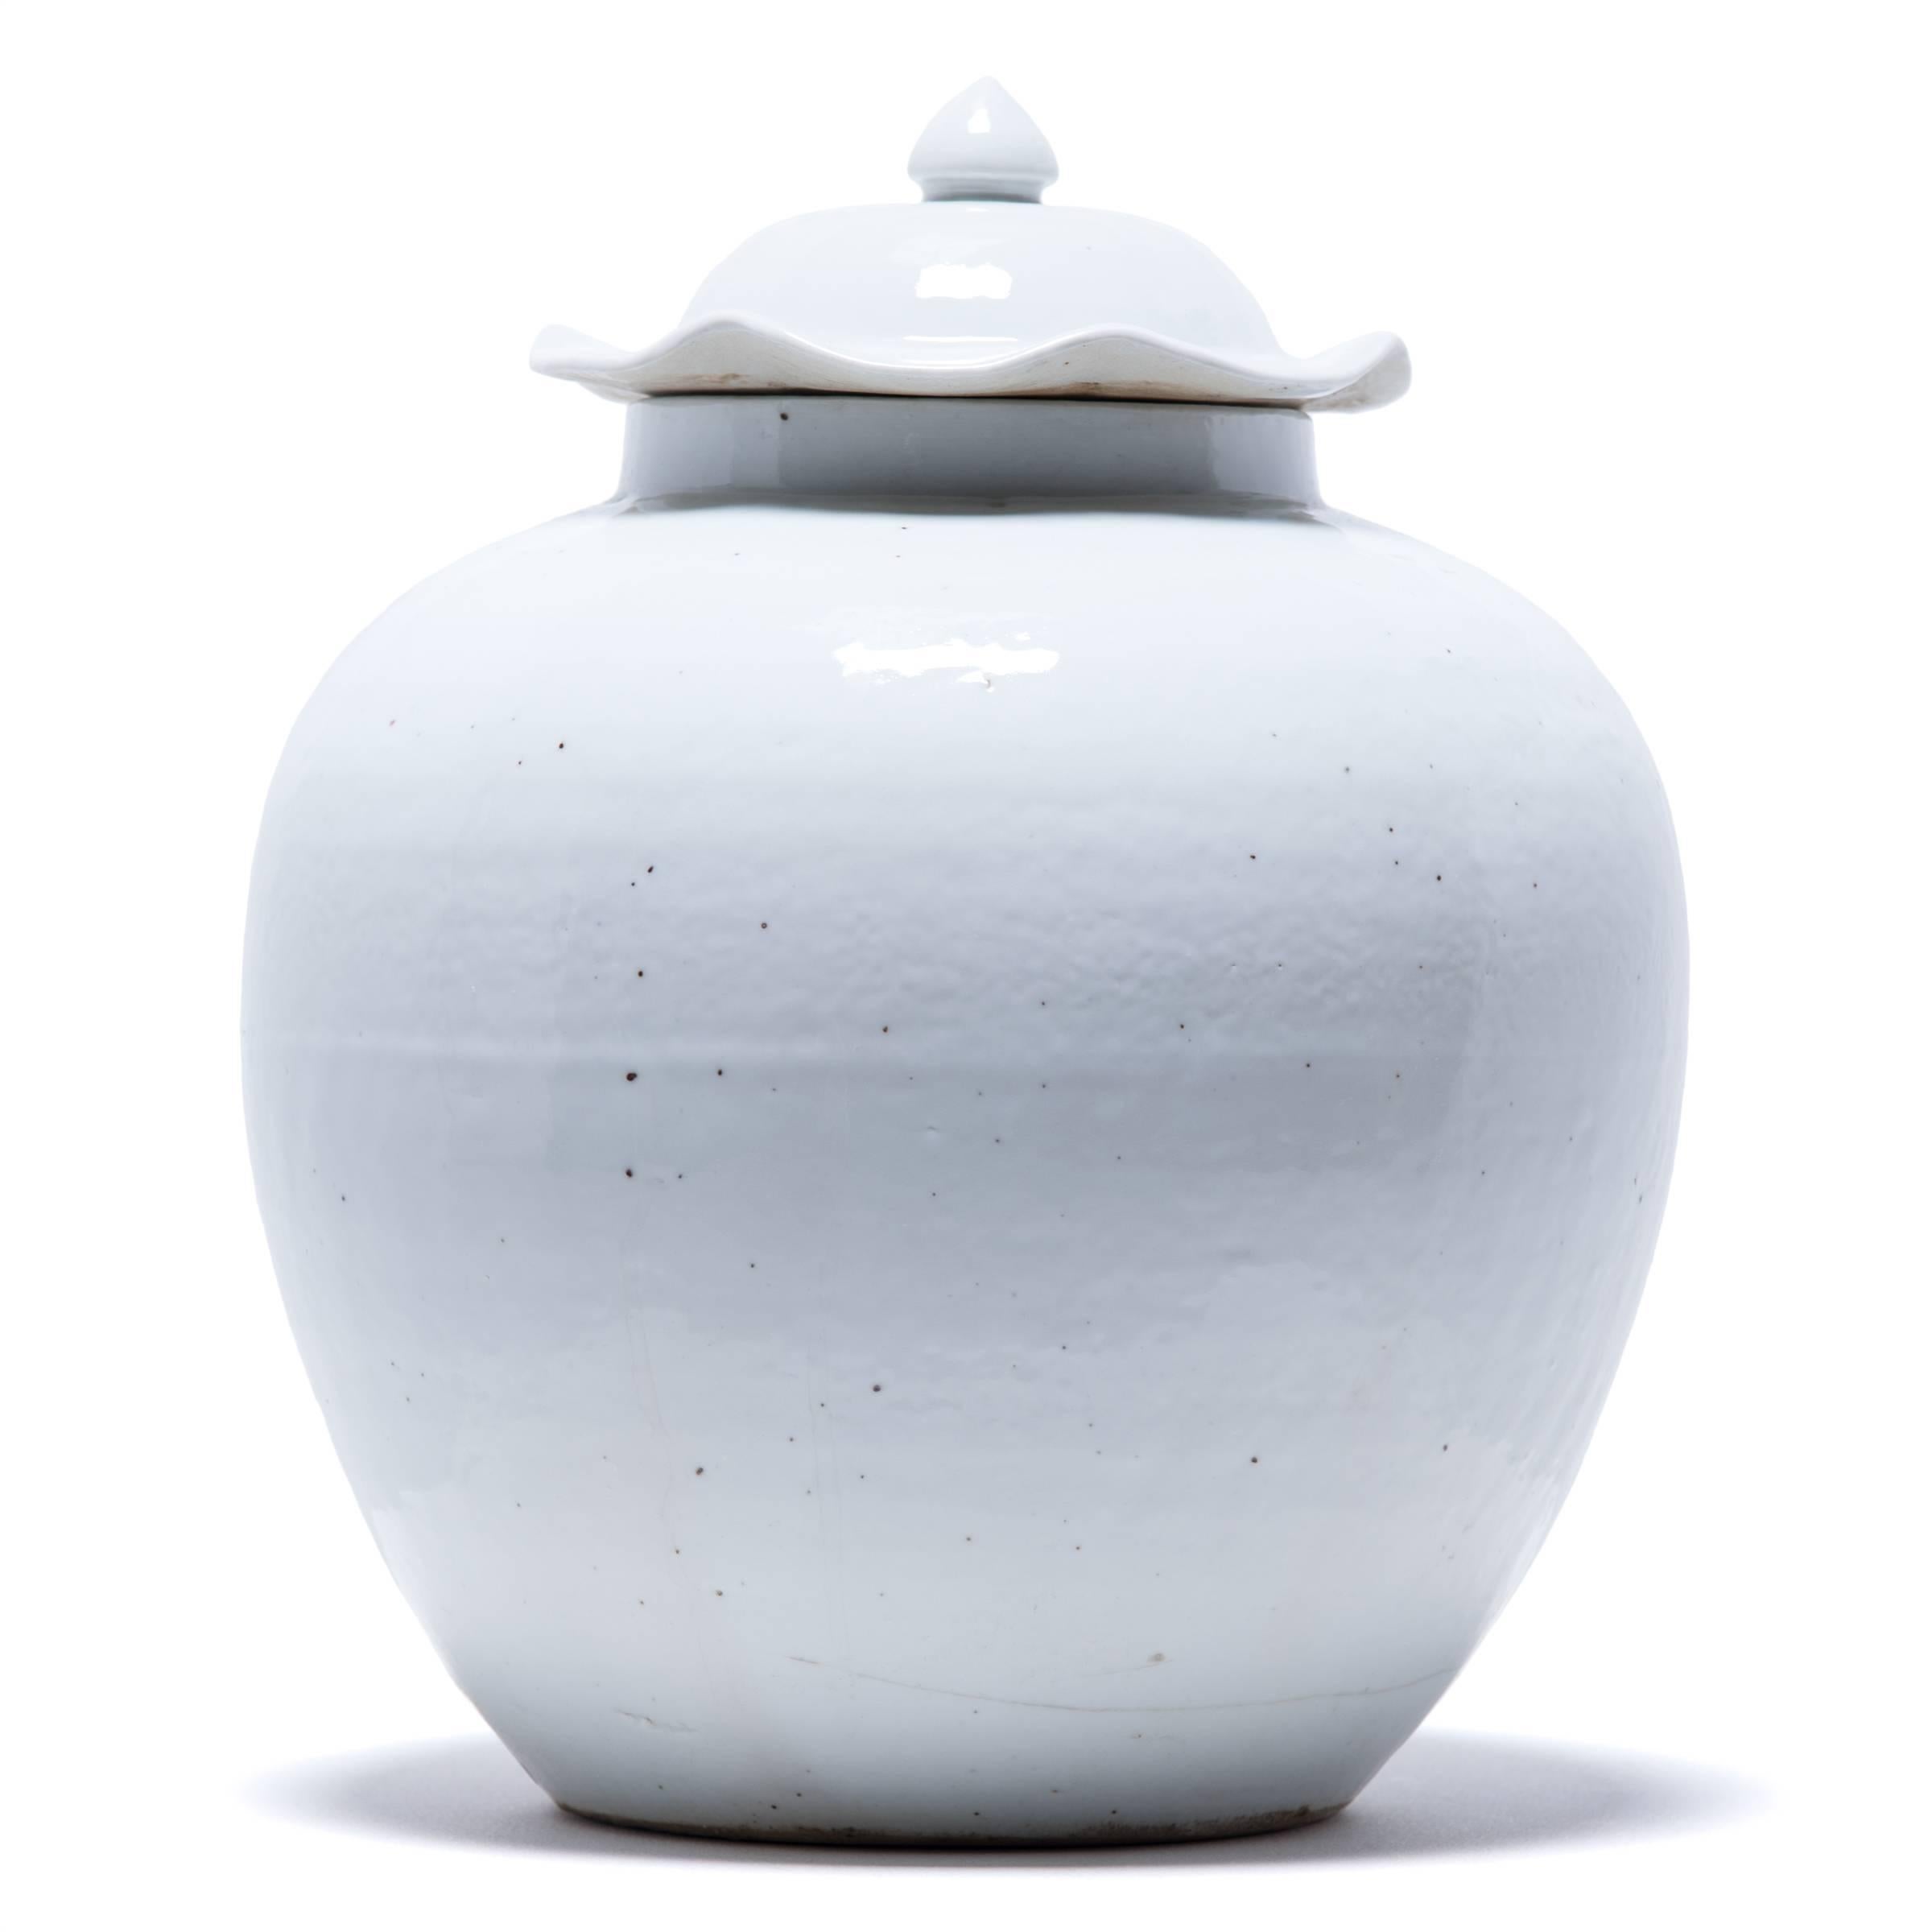 A milky white glaze emphasizes the sculptural form of this contemporary update on a Chinese Classic. Refining the traditional onion shape, the jar’s monochromatic look draws attention to its clean lines and artisanal qualities.

 